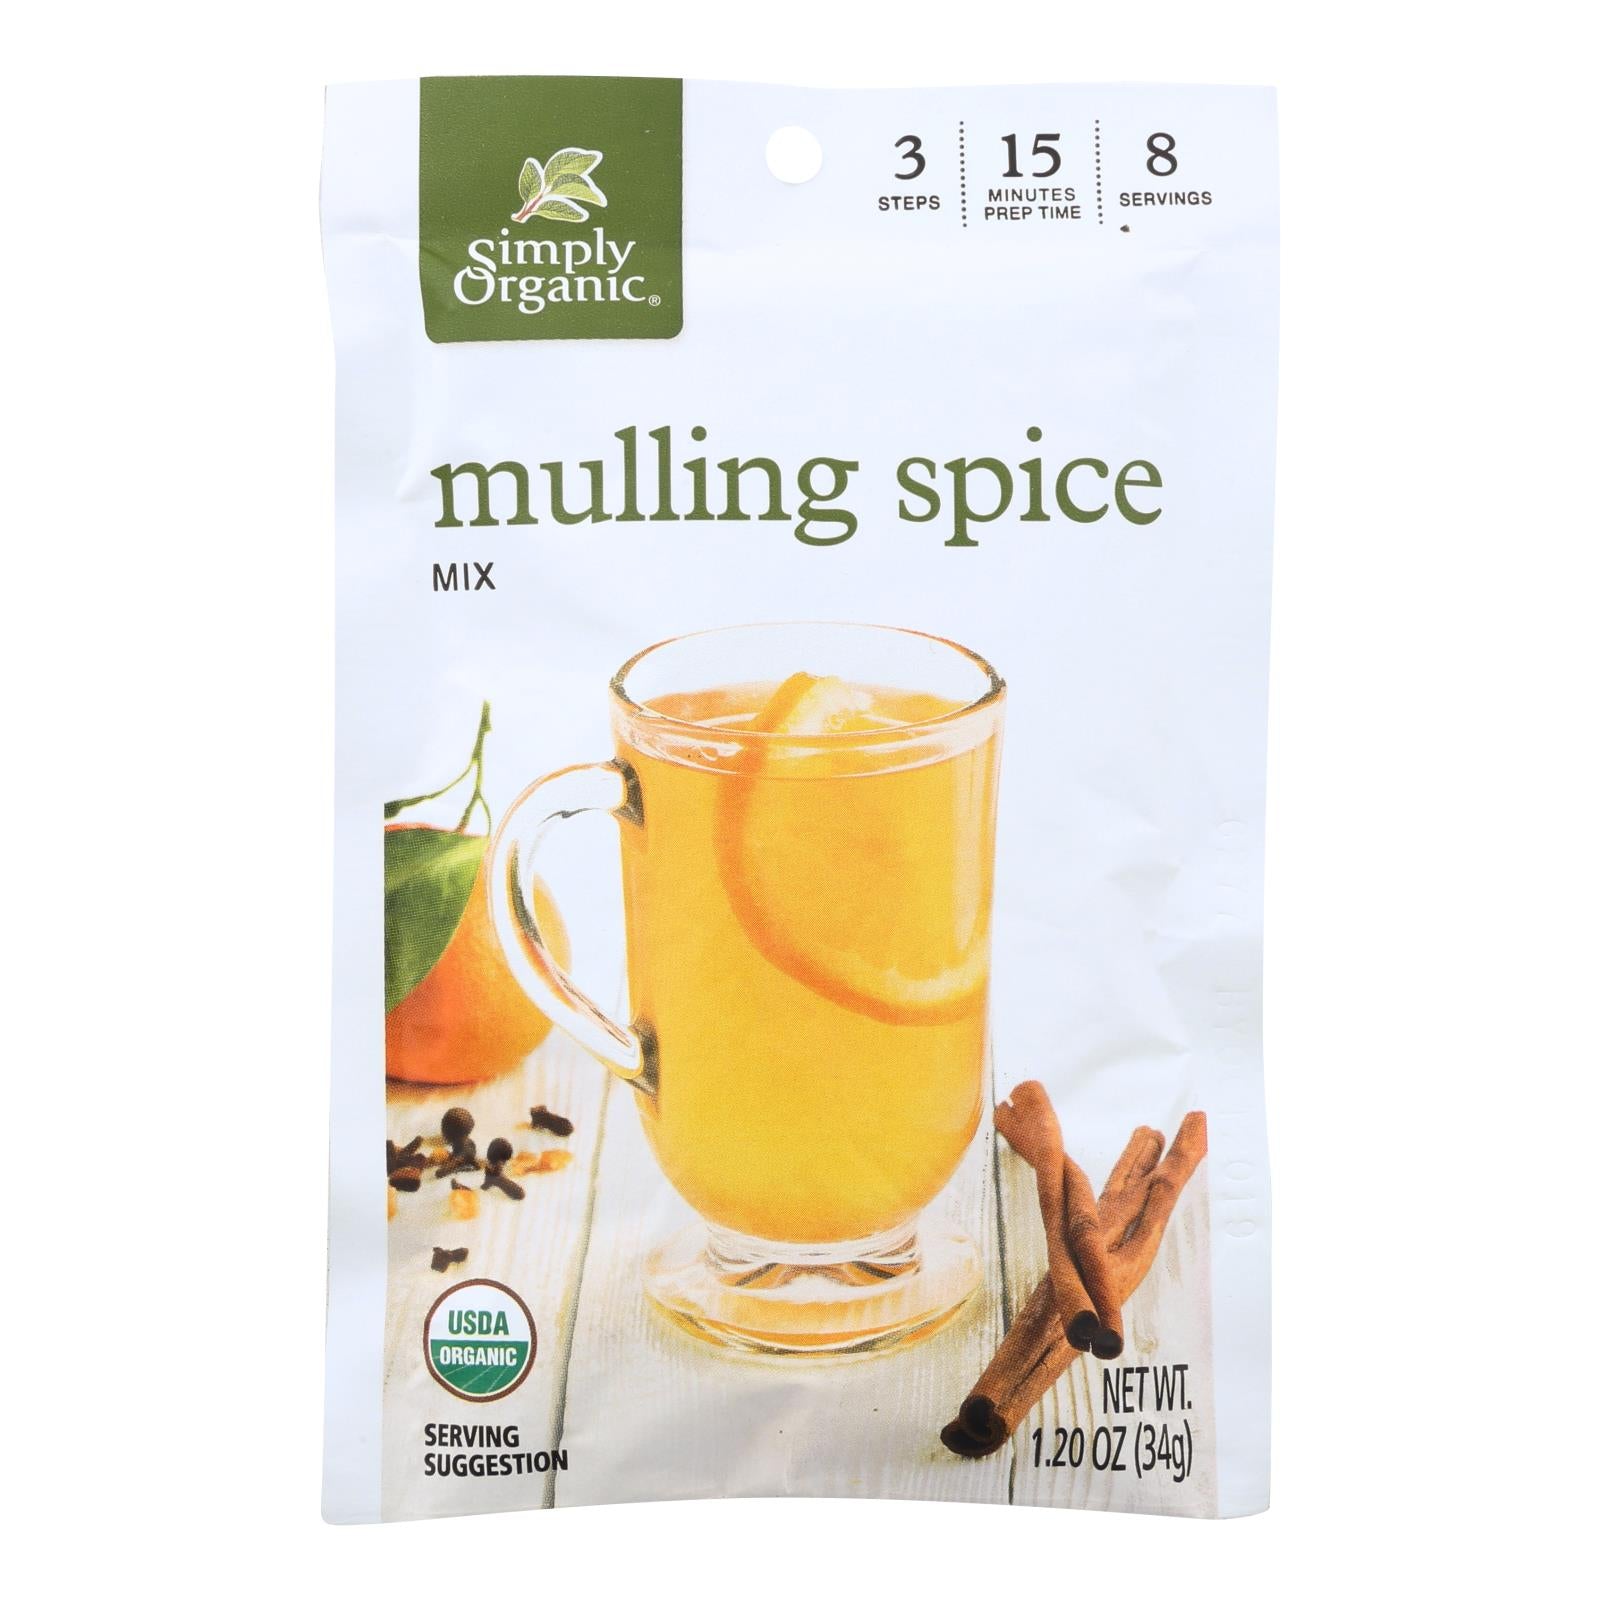 Simply Organic Mulling Spice - Organic - Gluten Free - 1.2 Oz - Case Of 8 - Whole Green Foods